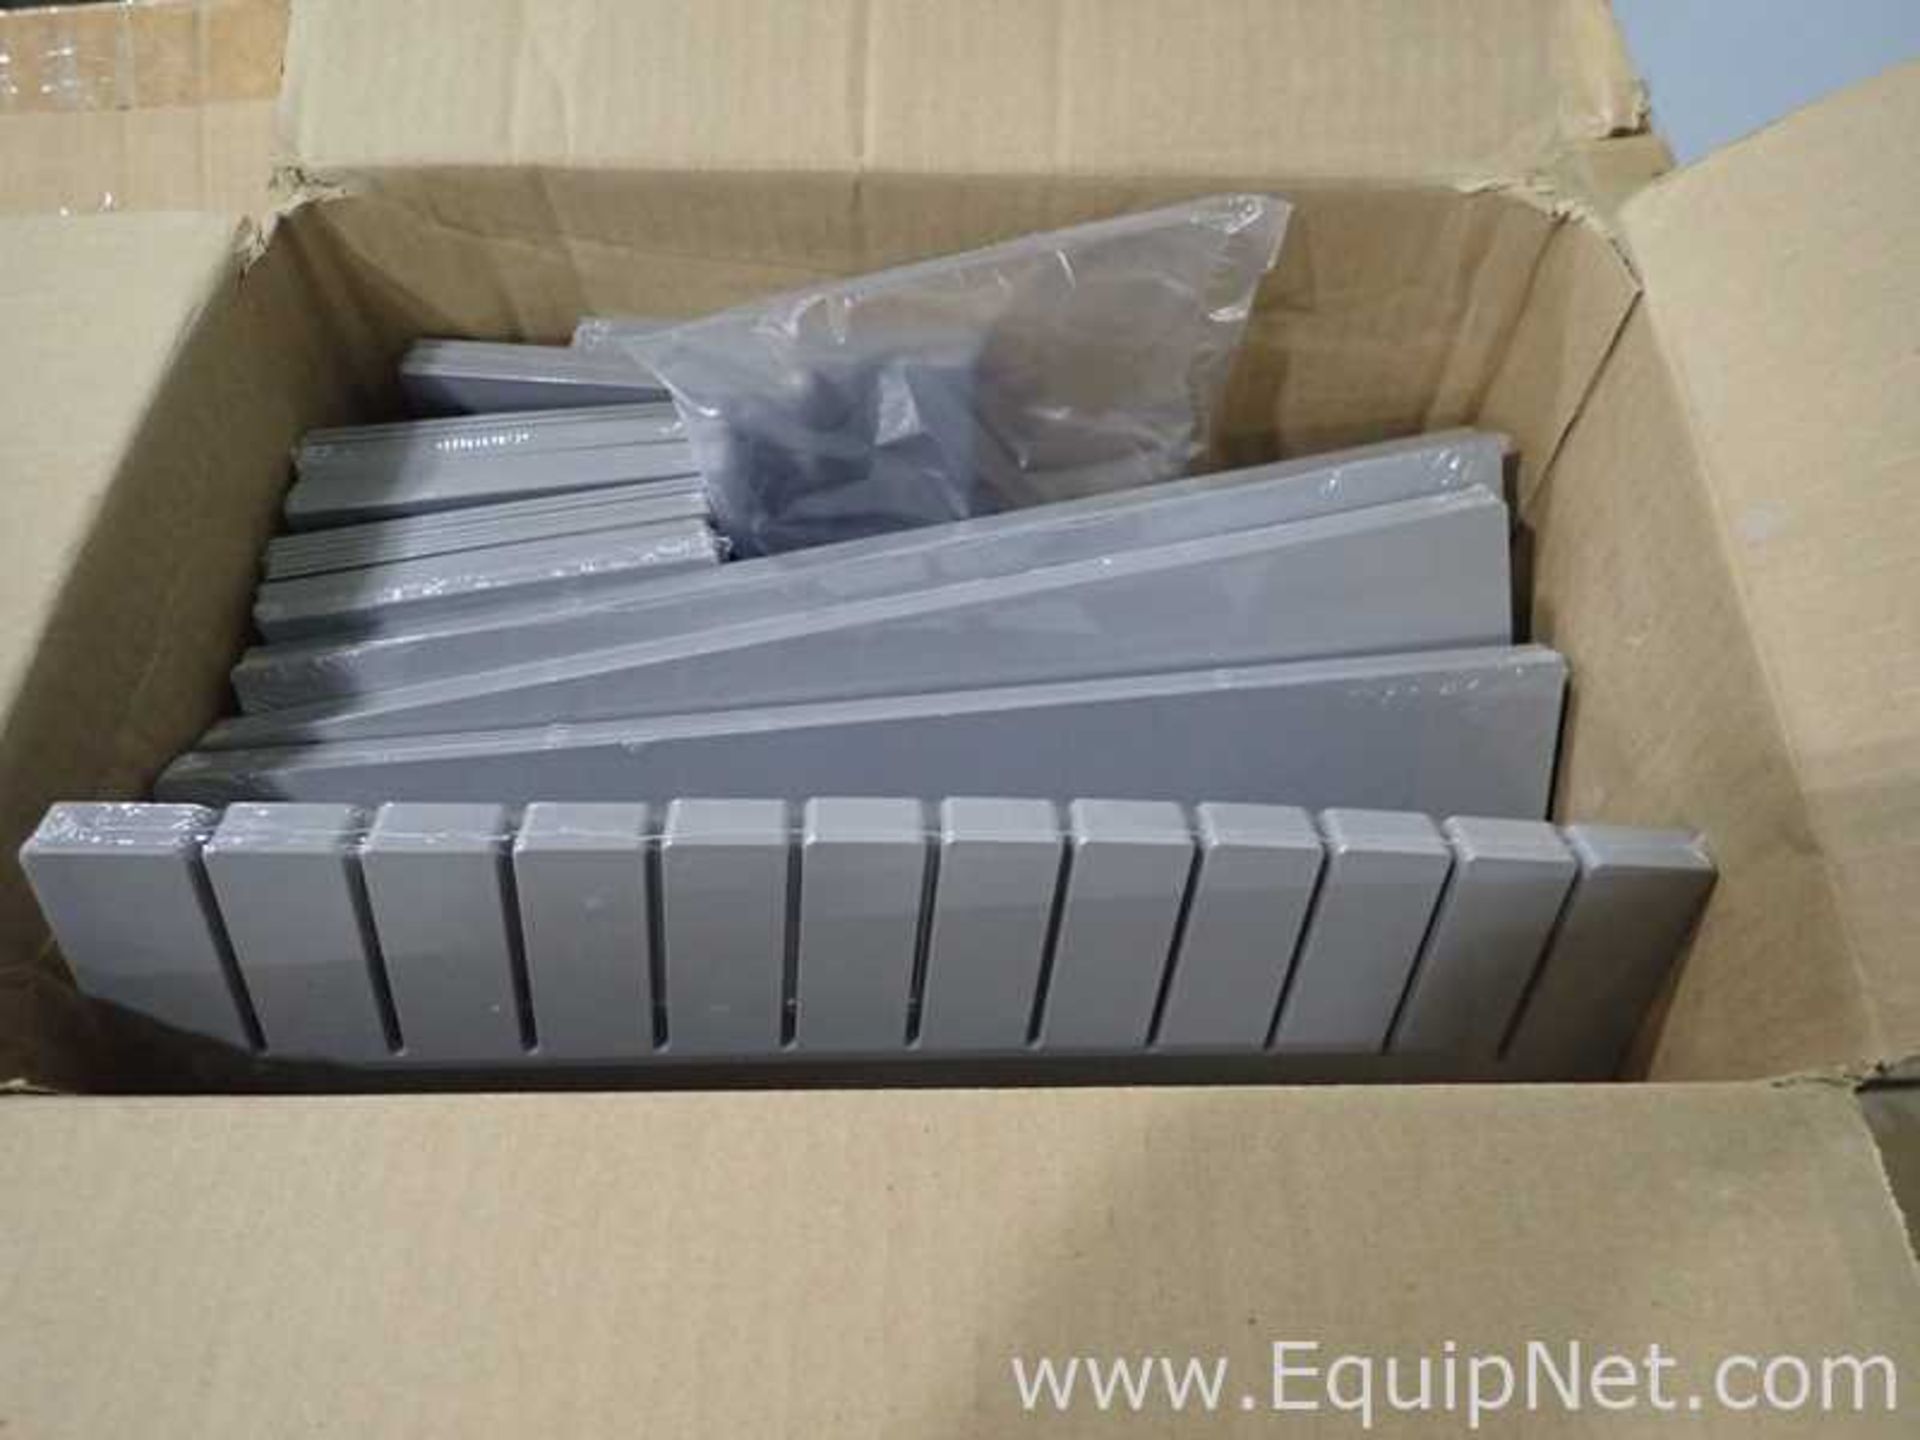 Lot of Approximately 55 Quantum Storage Systems DG92060CL Clear Dividable Grid Containers - Image 8 of 10